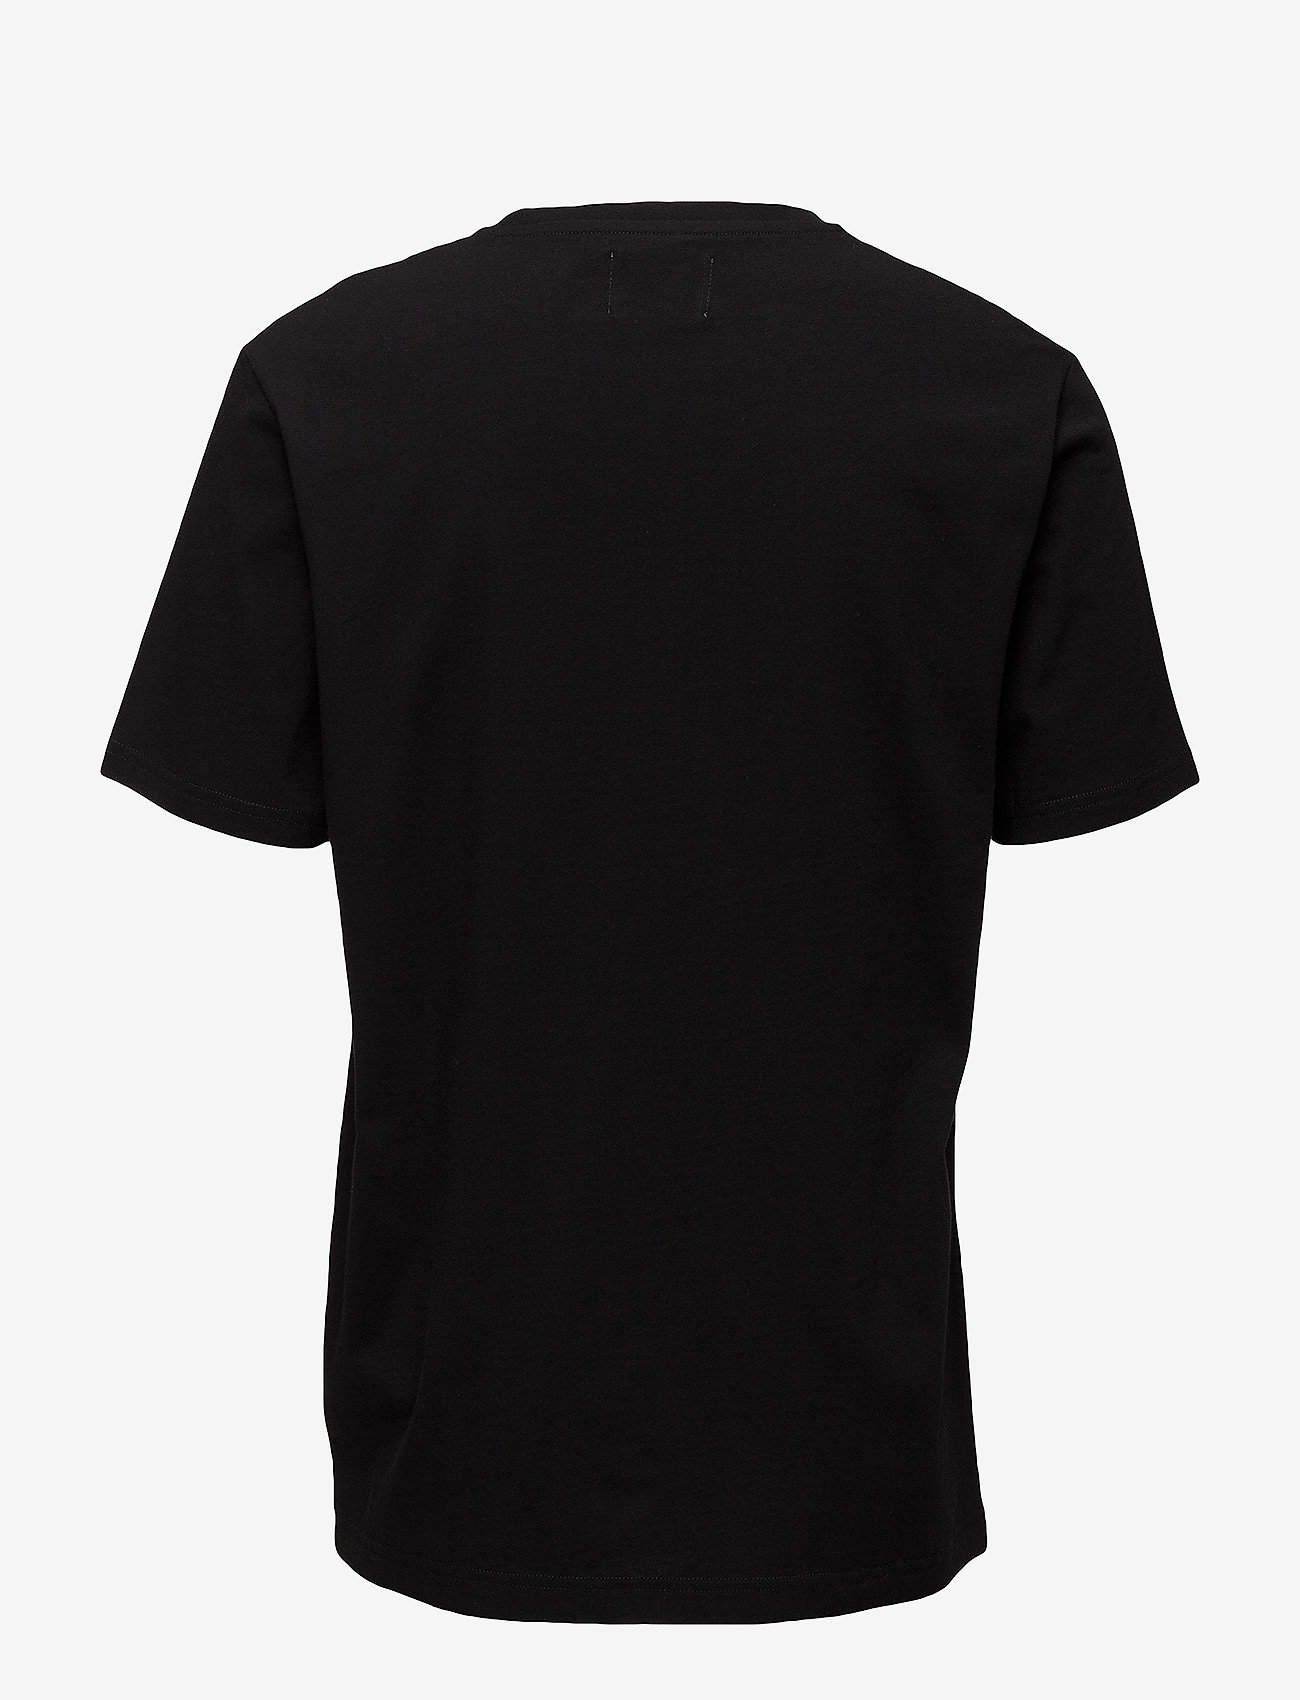 Double A by Wood Wood - Ace T-shirt - short-sleeved - black - 1